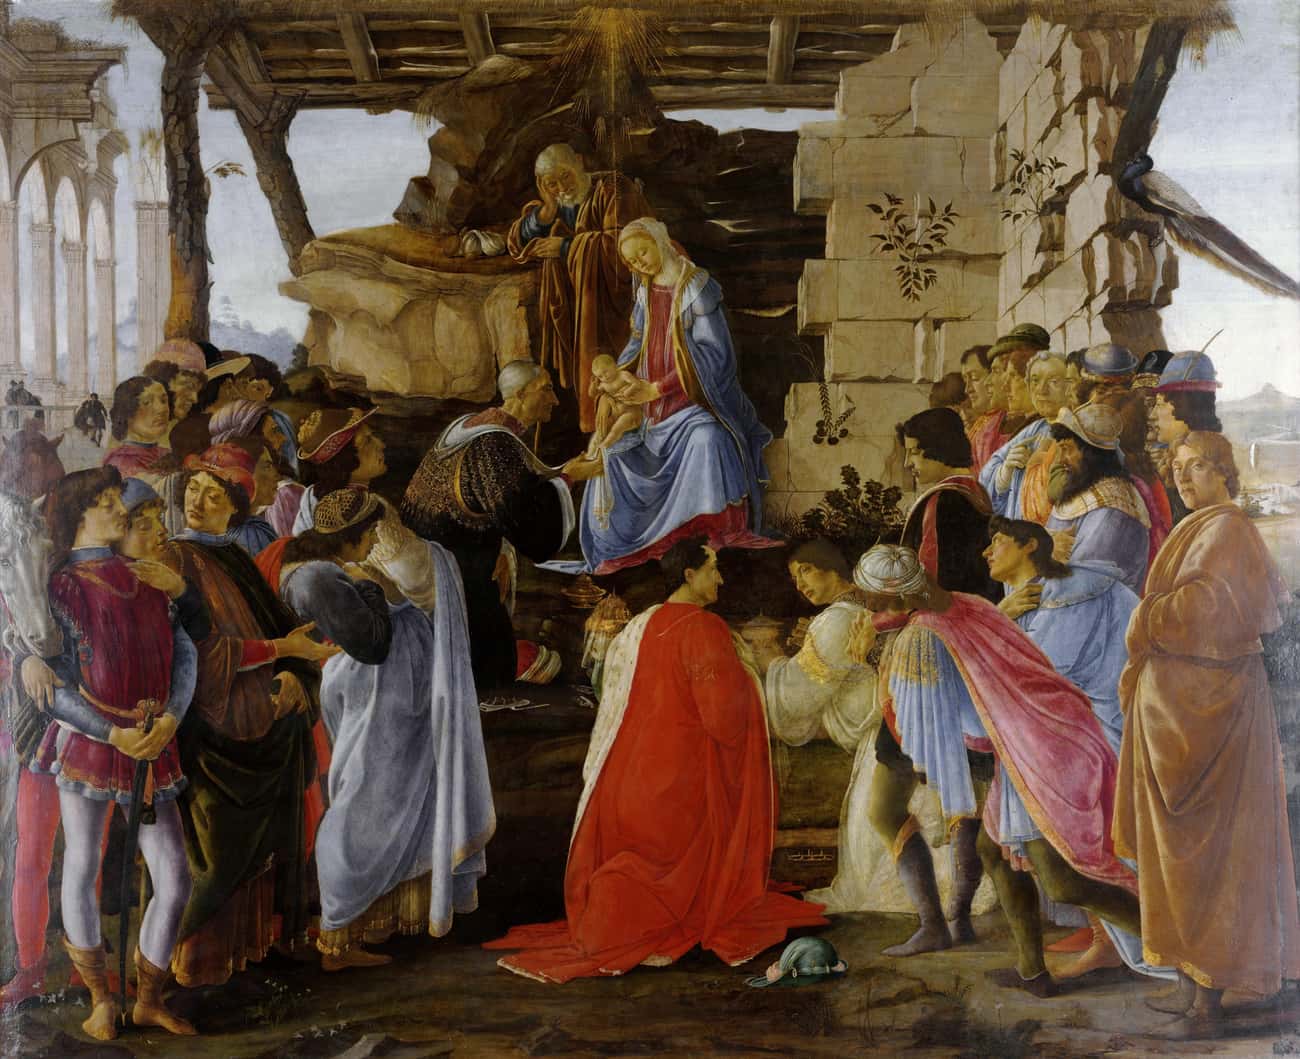 Adoration of the Magi of 1475